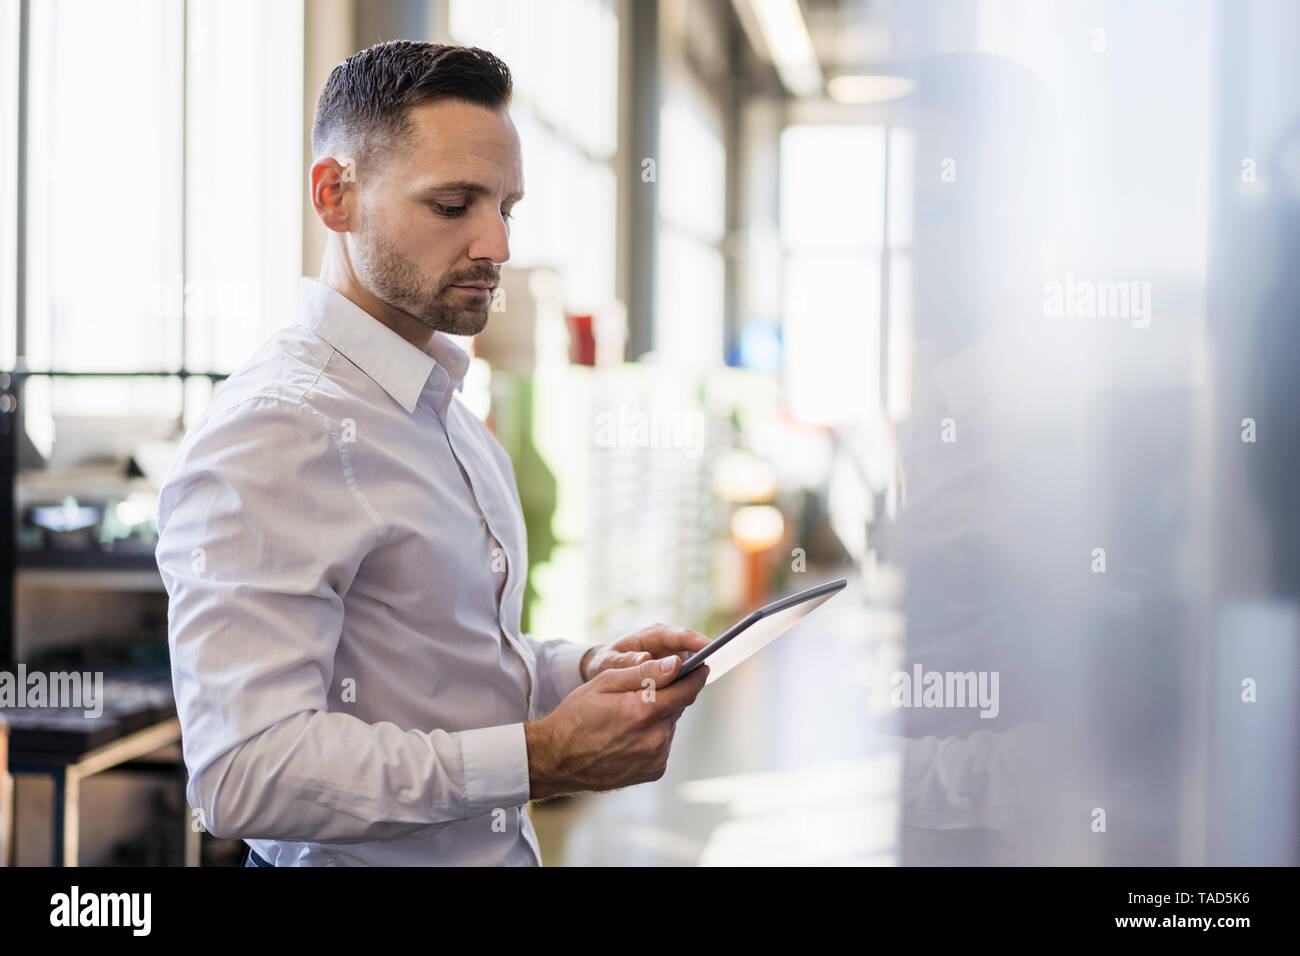 Businessman using tablet at a machine in modern factory Stock Photo